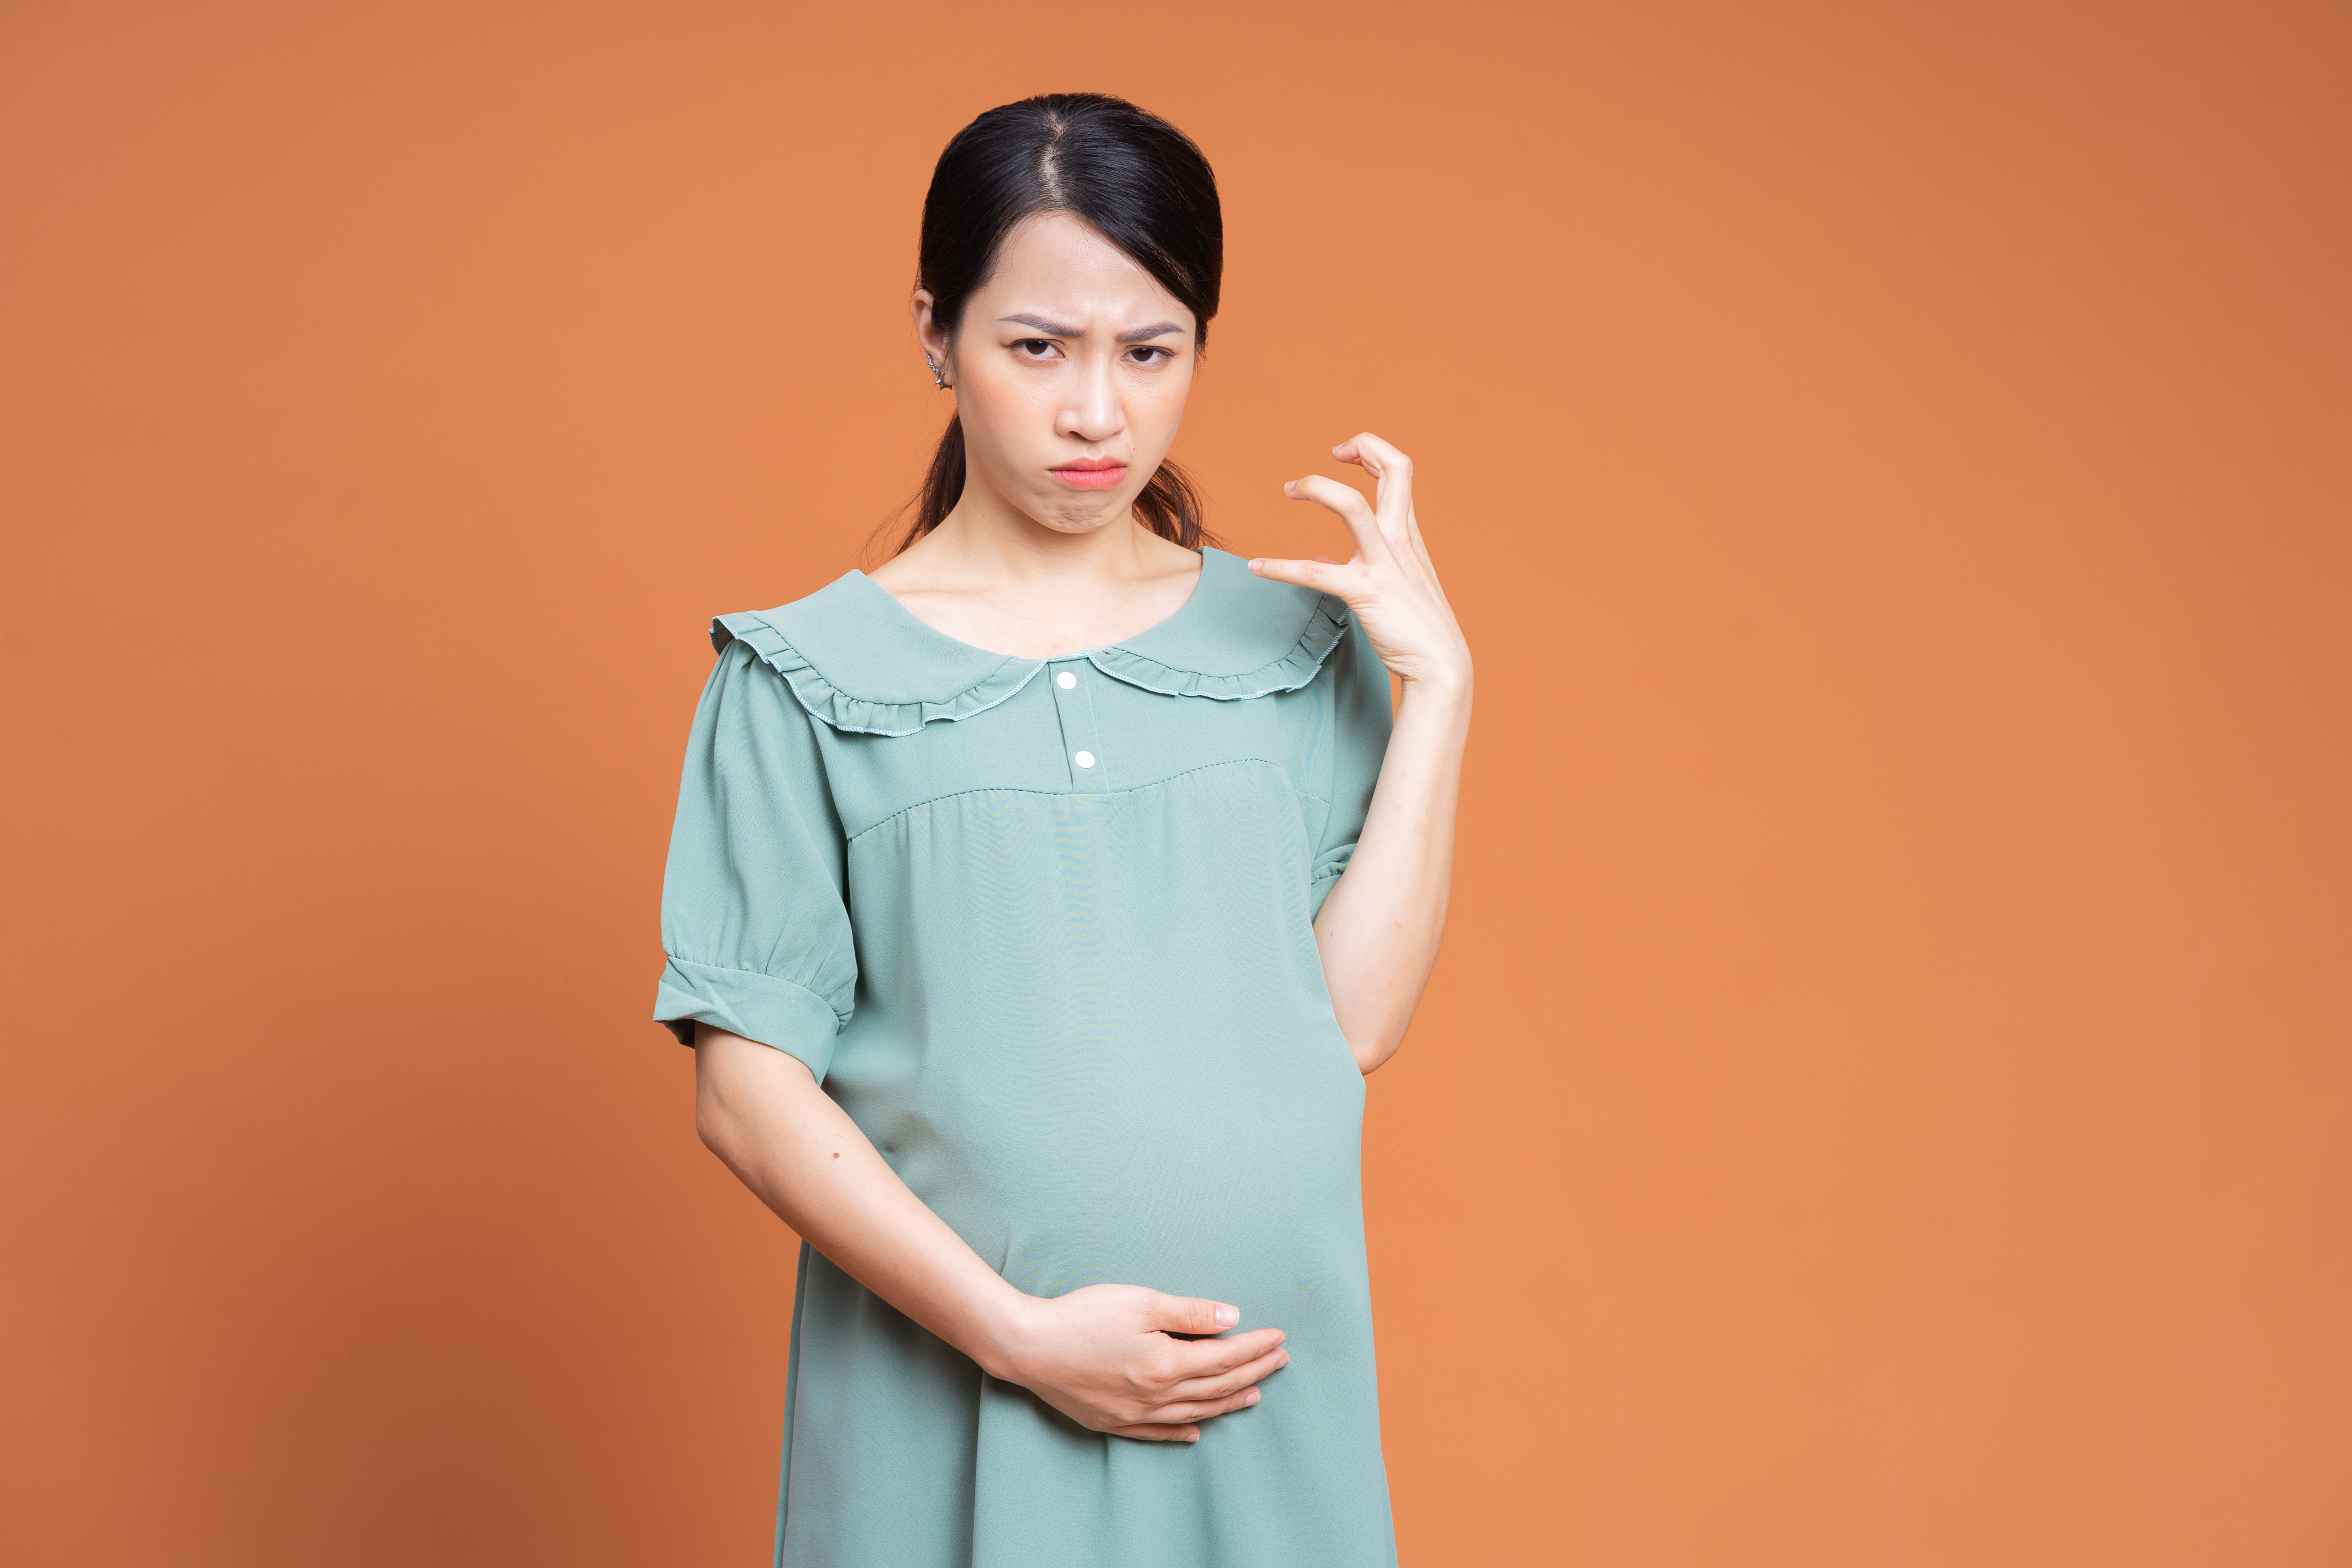 A devastated pregnant woman | Source: Getty Images